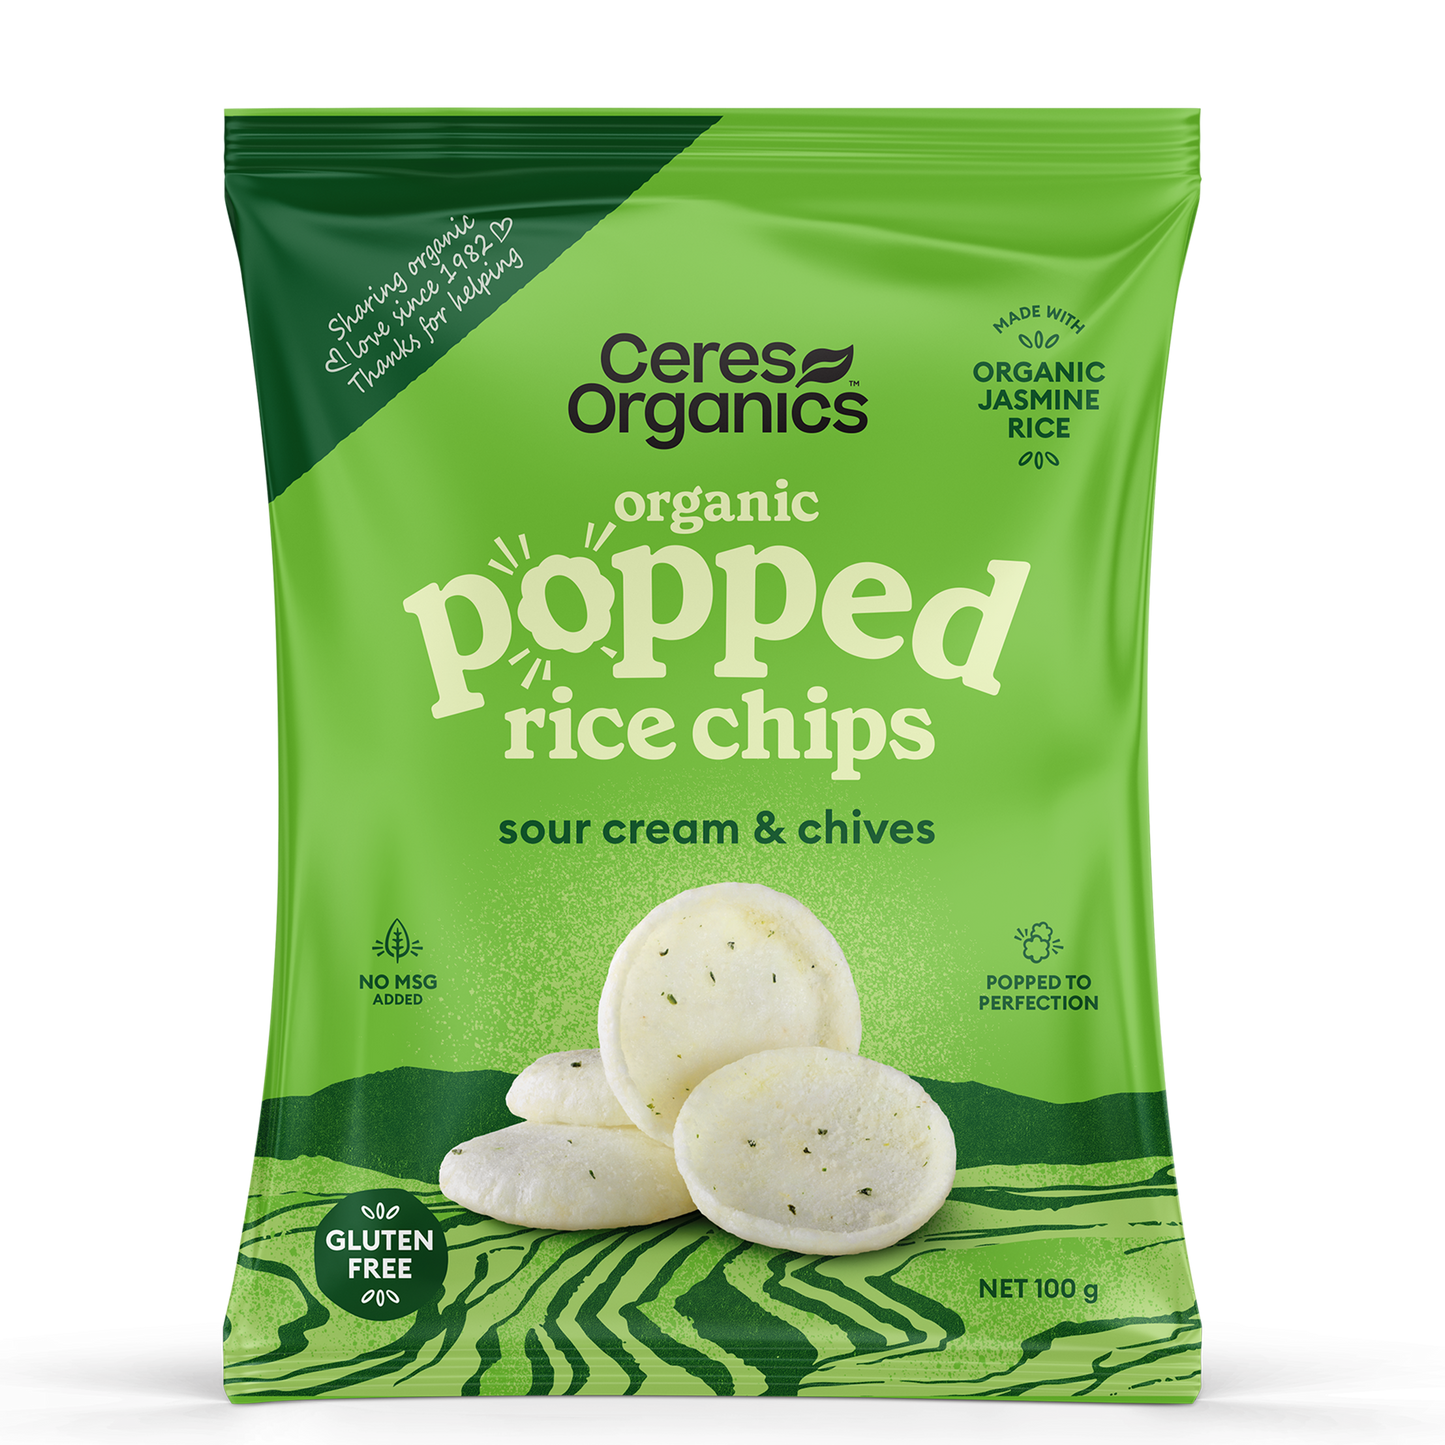 Organic Popped Rice Chips, Sour Cream & Chives